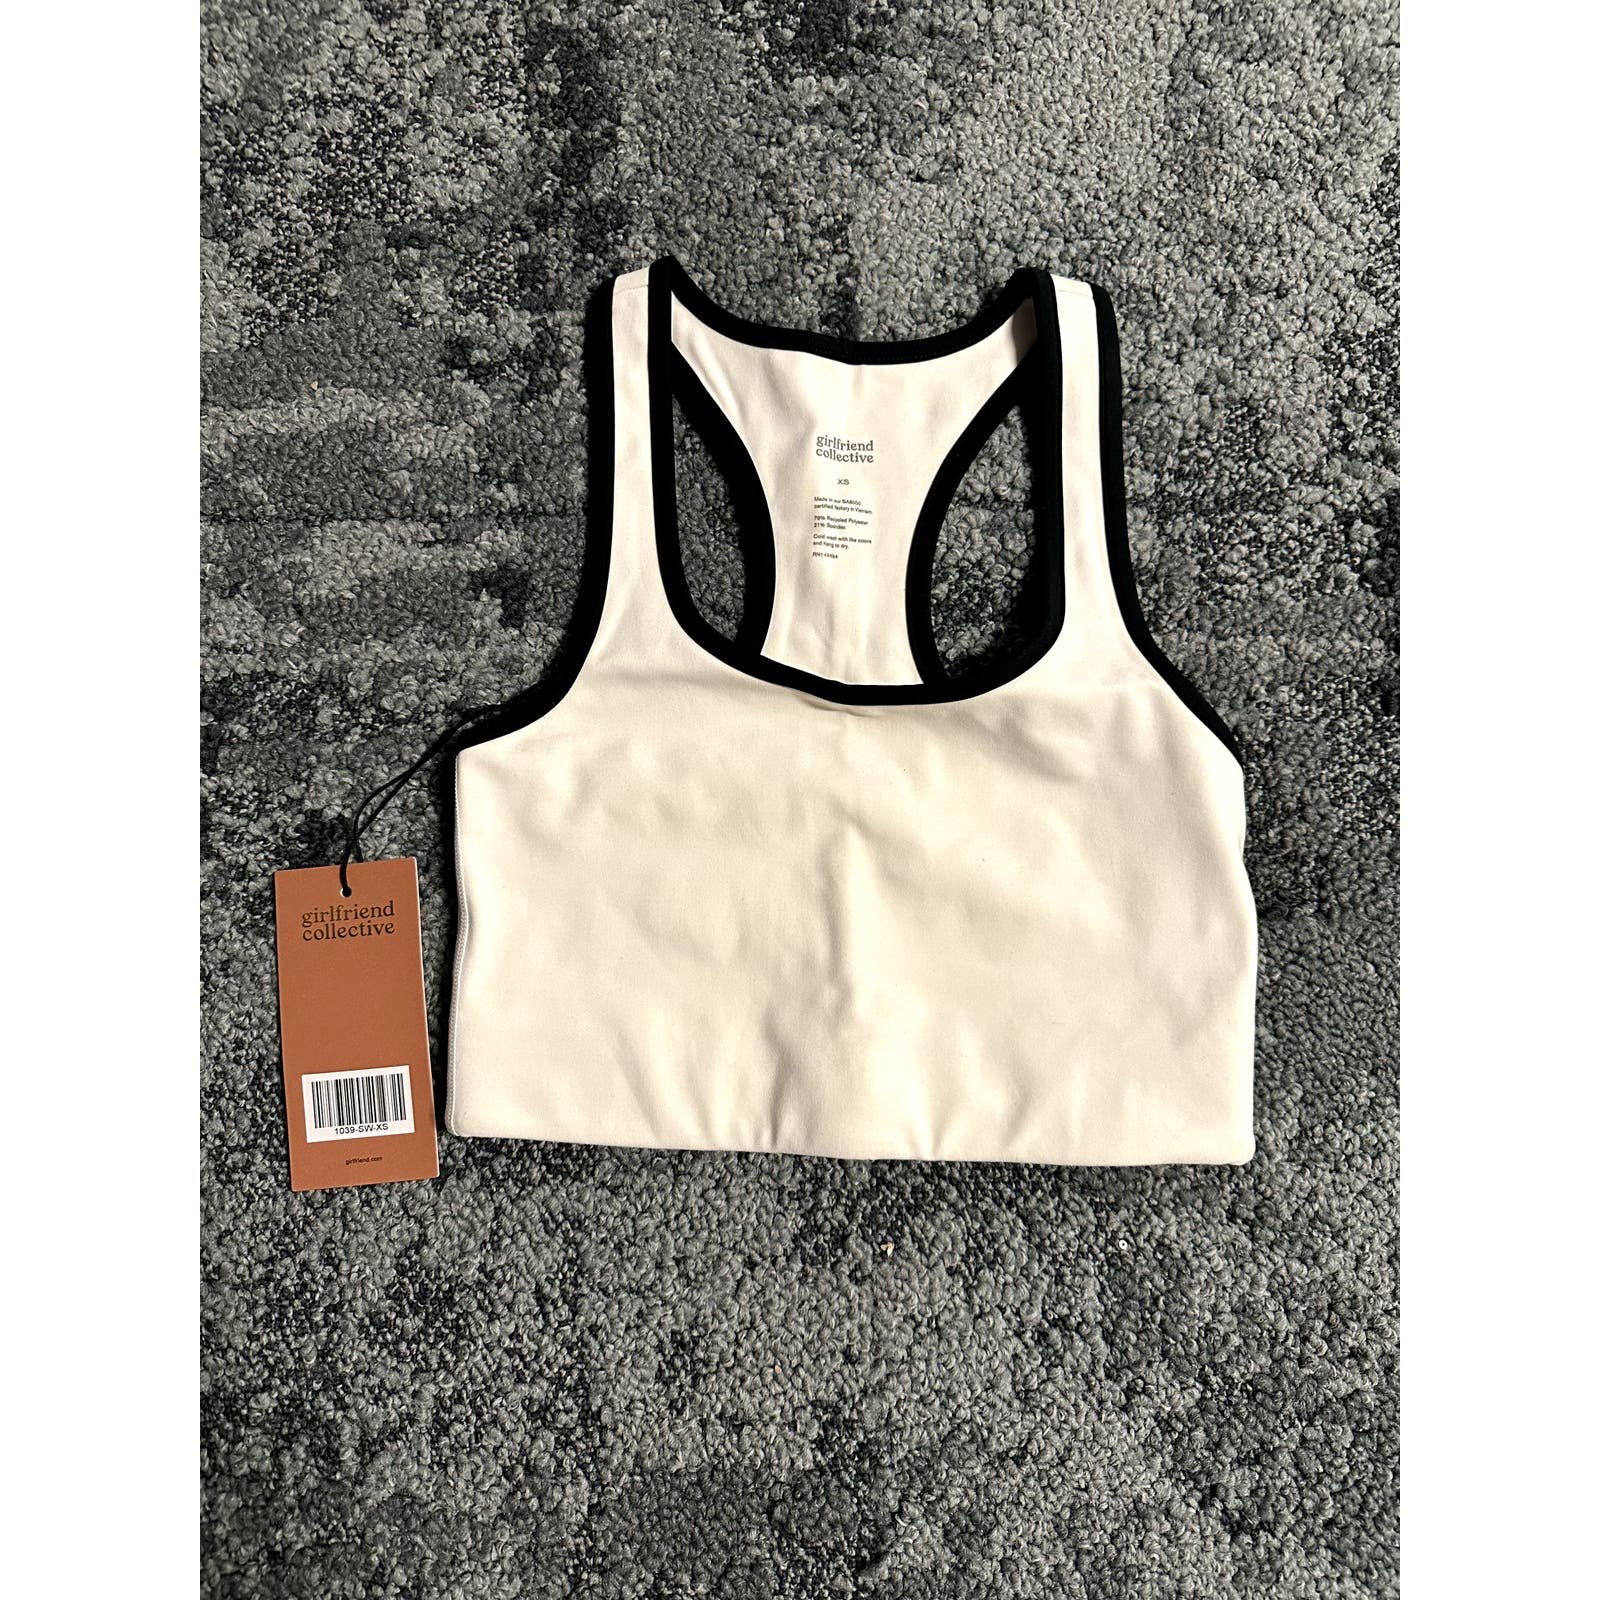 Custom Girlfriend Collective Ivory Tipped Paloma Racerback Bra XS NWT MSRP: $48 LGw8oK2Nm Online Shop